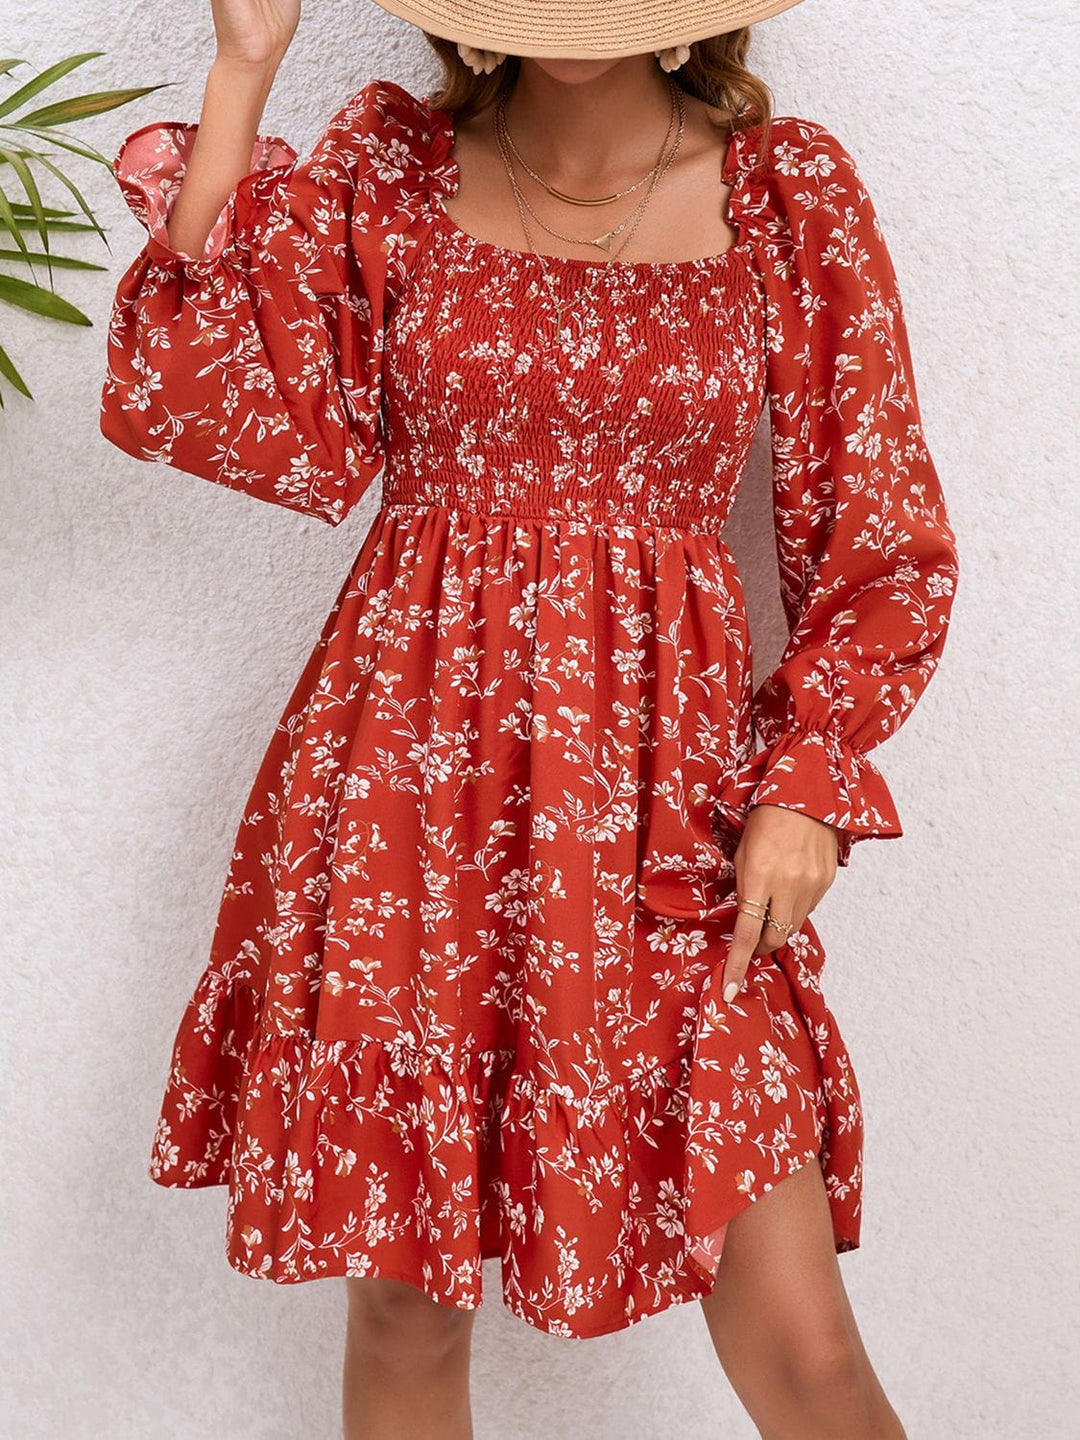 The802Gypsy Dresses Floral / S Gypsy-Apple Floral Square Neck Dress